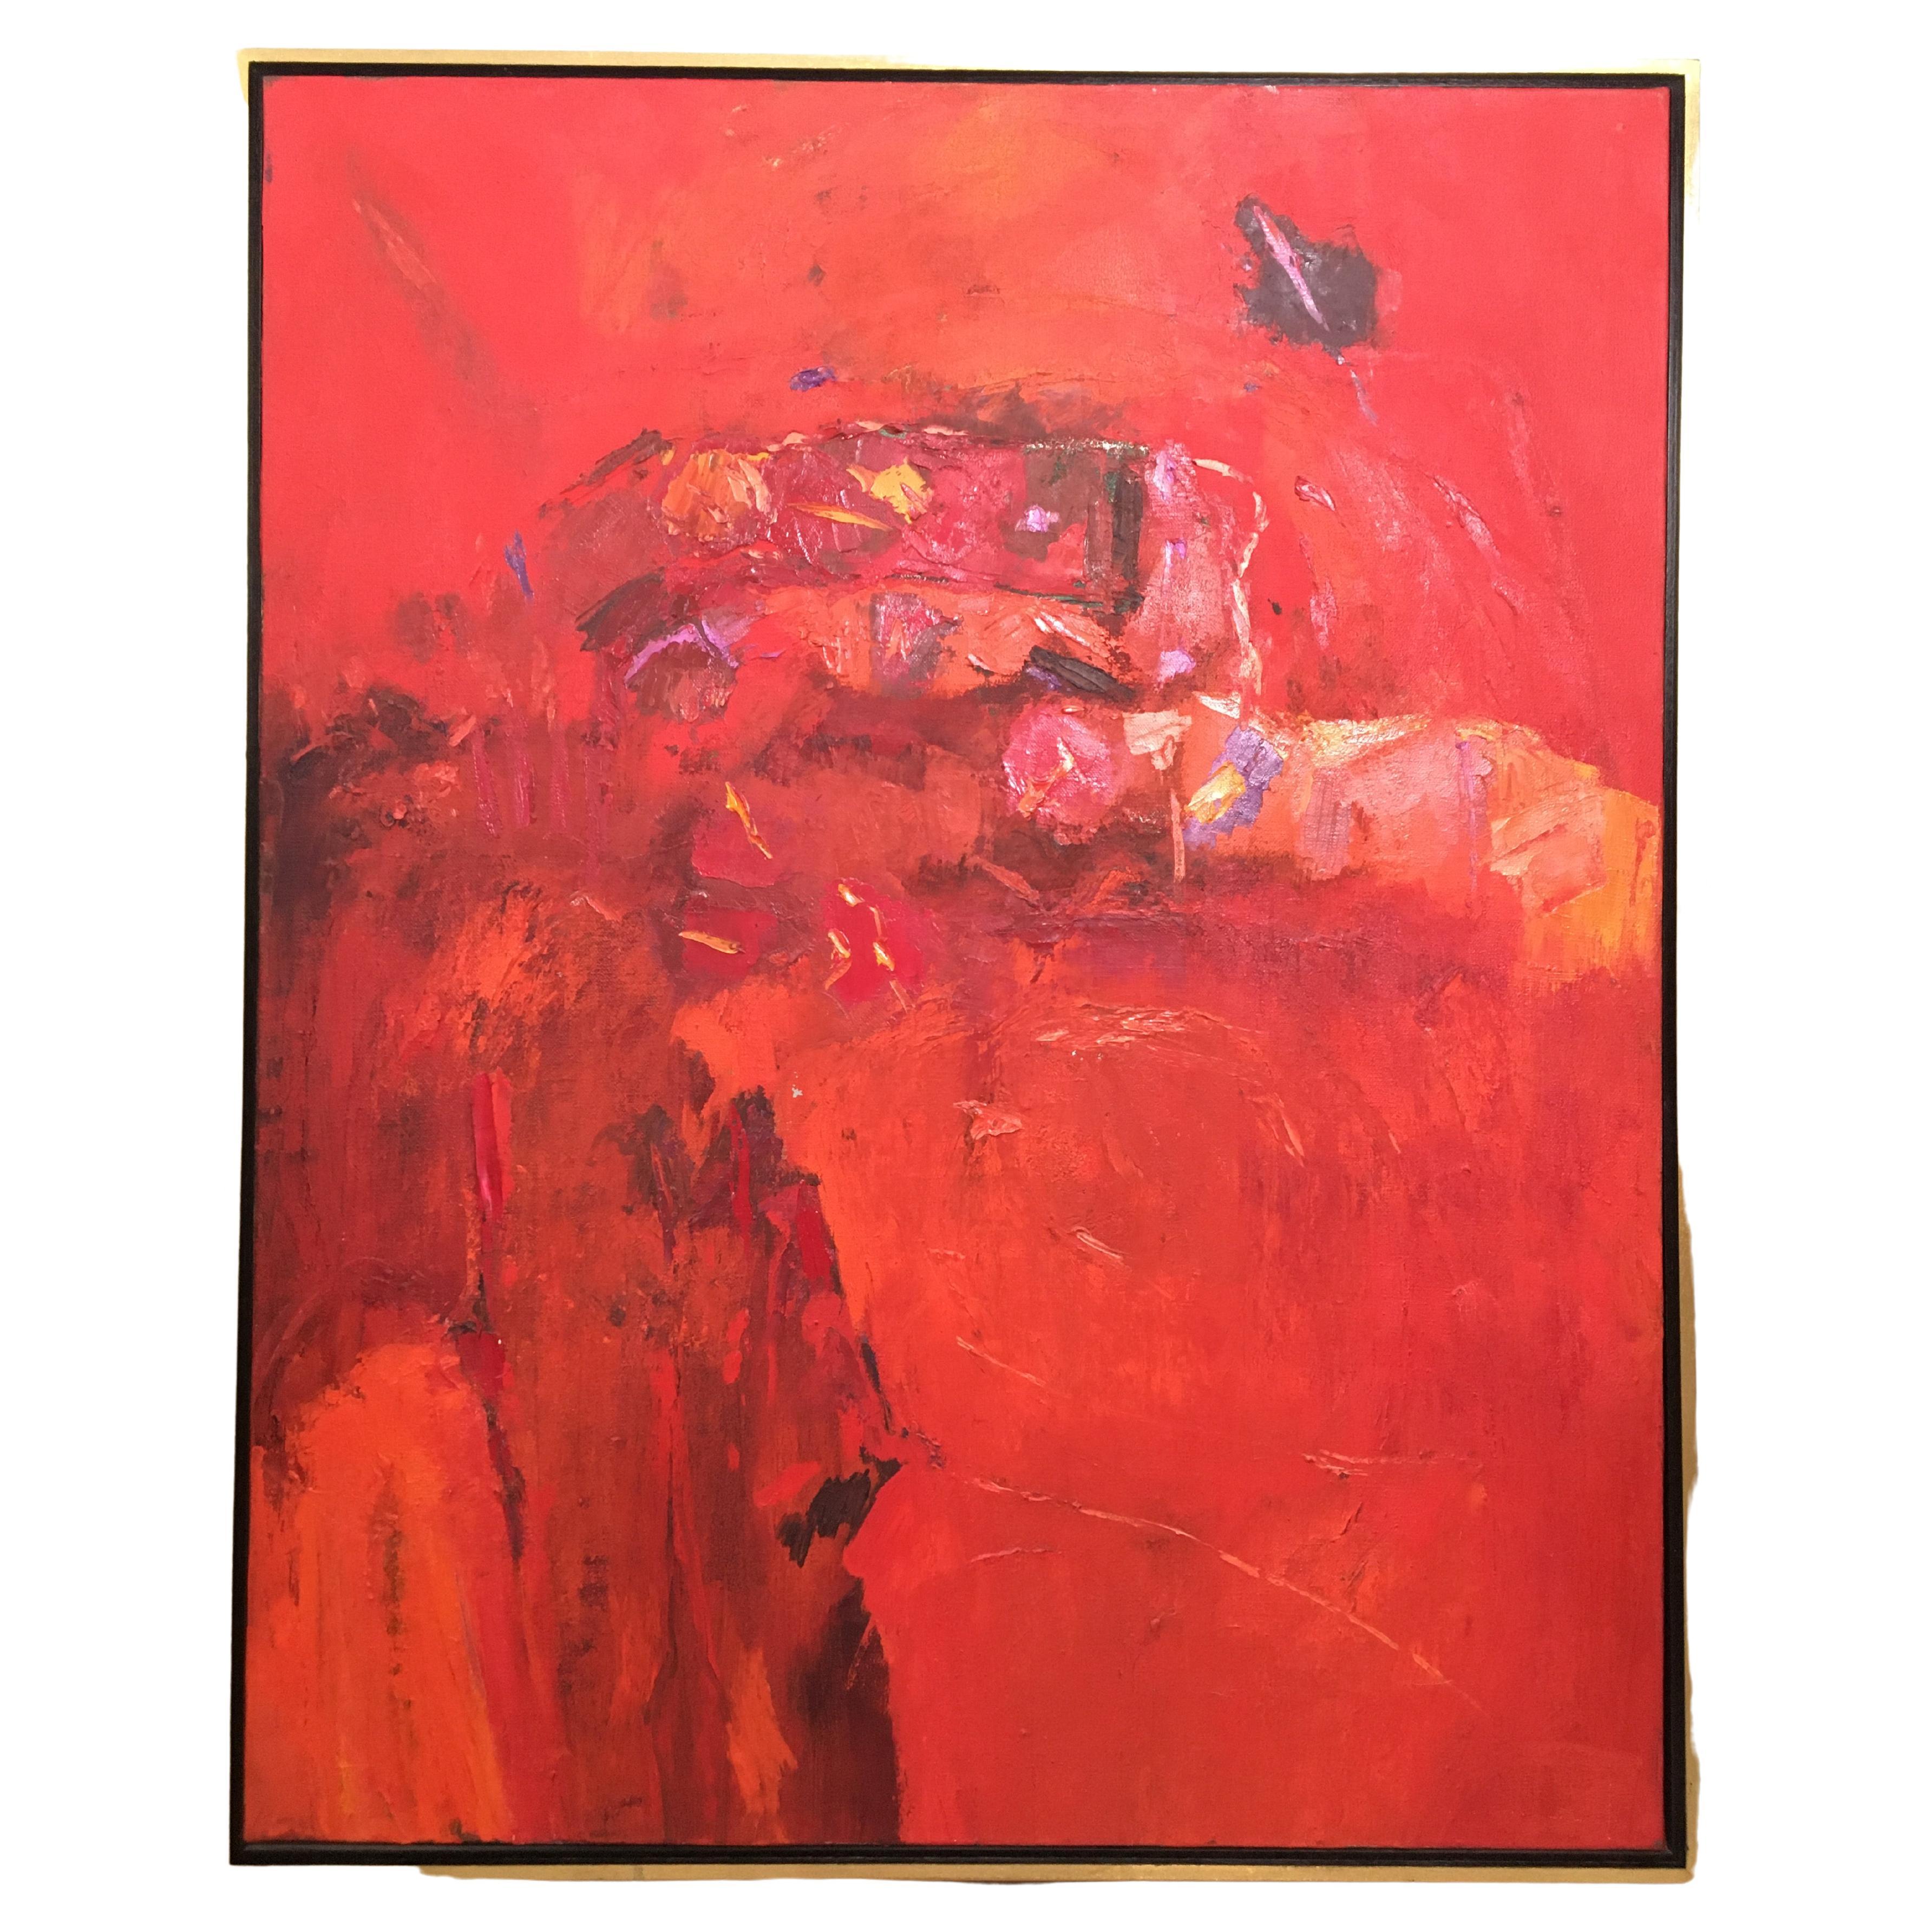 A large oil on canvas by extensively exhibited Australian artist, Beverley Downie, a painter whose keen interest in opera has strongly influenced her work. 

Downie is now in retirement but in the later part of the 1970s she painted a brilliant